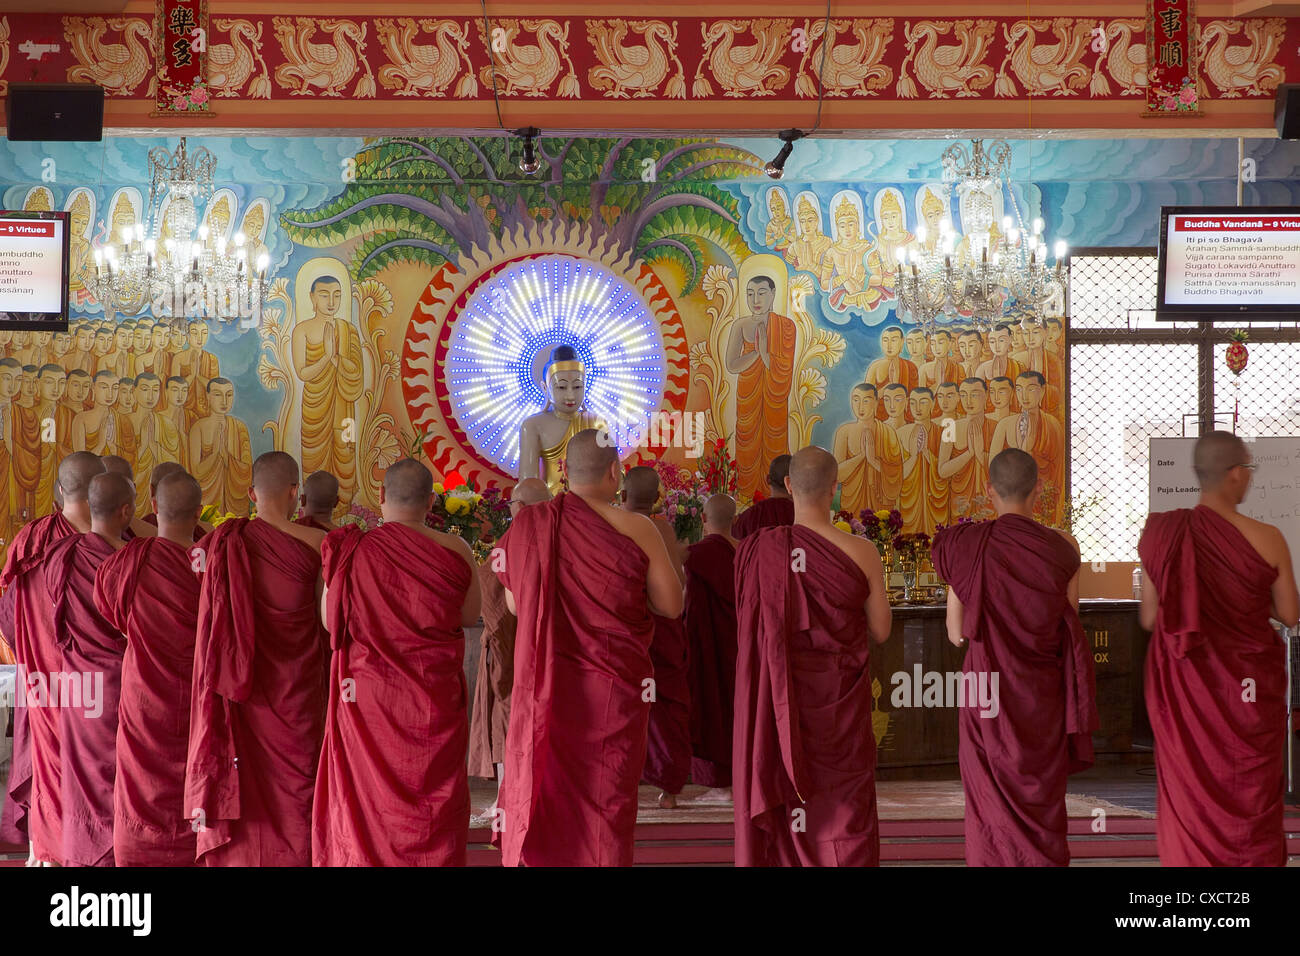 Buddhist Monks Worshipping Buddha in Temple Altar with Painted Murals of Disciples and Bodhisattvas Stock Photo